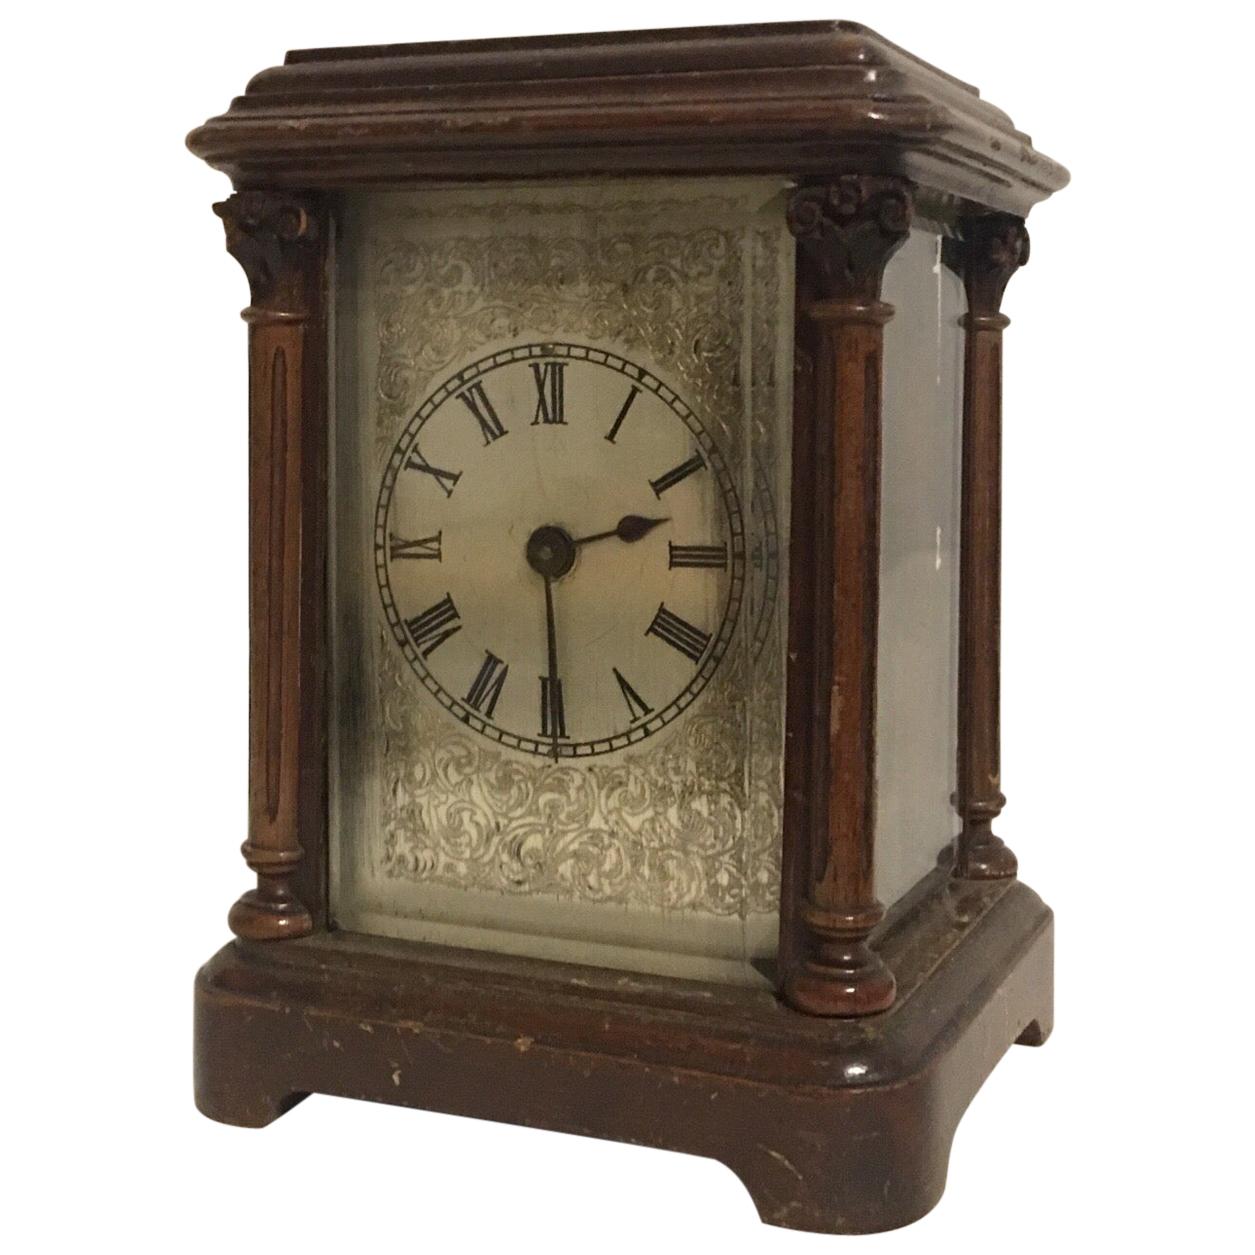 Rare Antique Timepiece Wooden Mantel / Carriage Clock For Sale